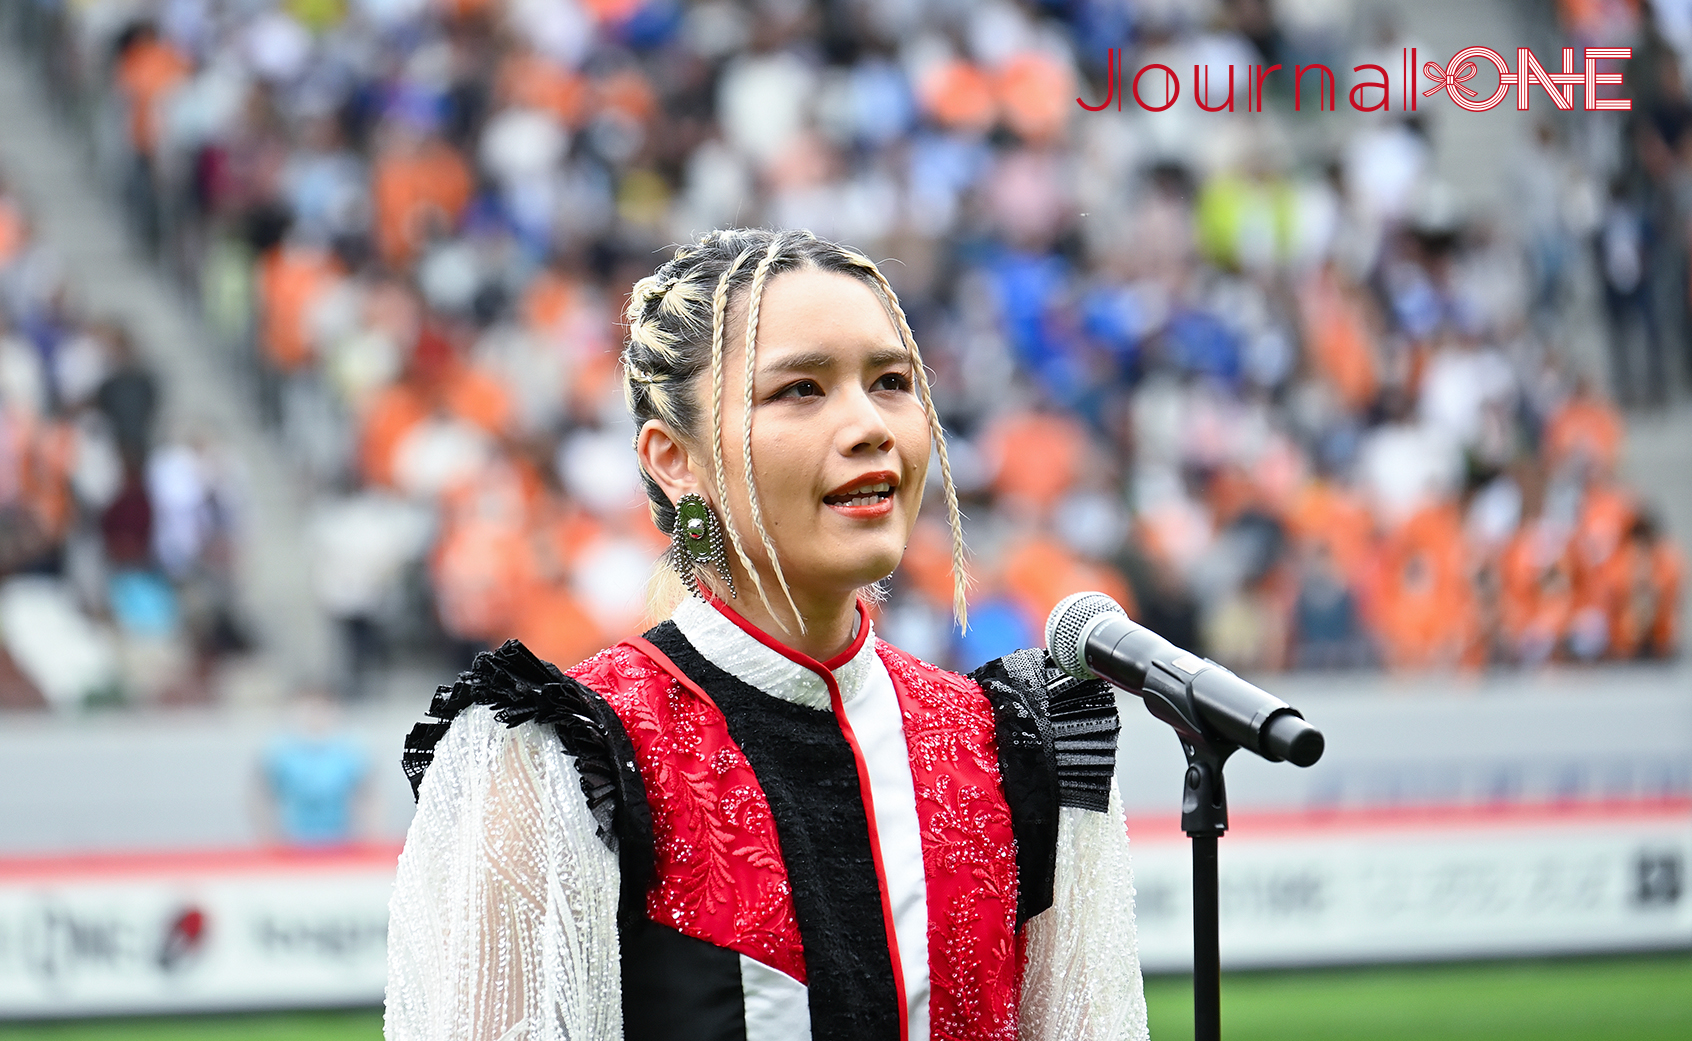 Singer-songwriter Anly sang the national anthem.; Photo by Journal-ONE